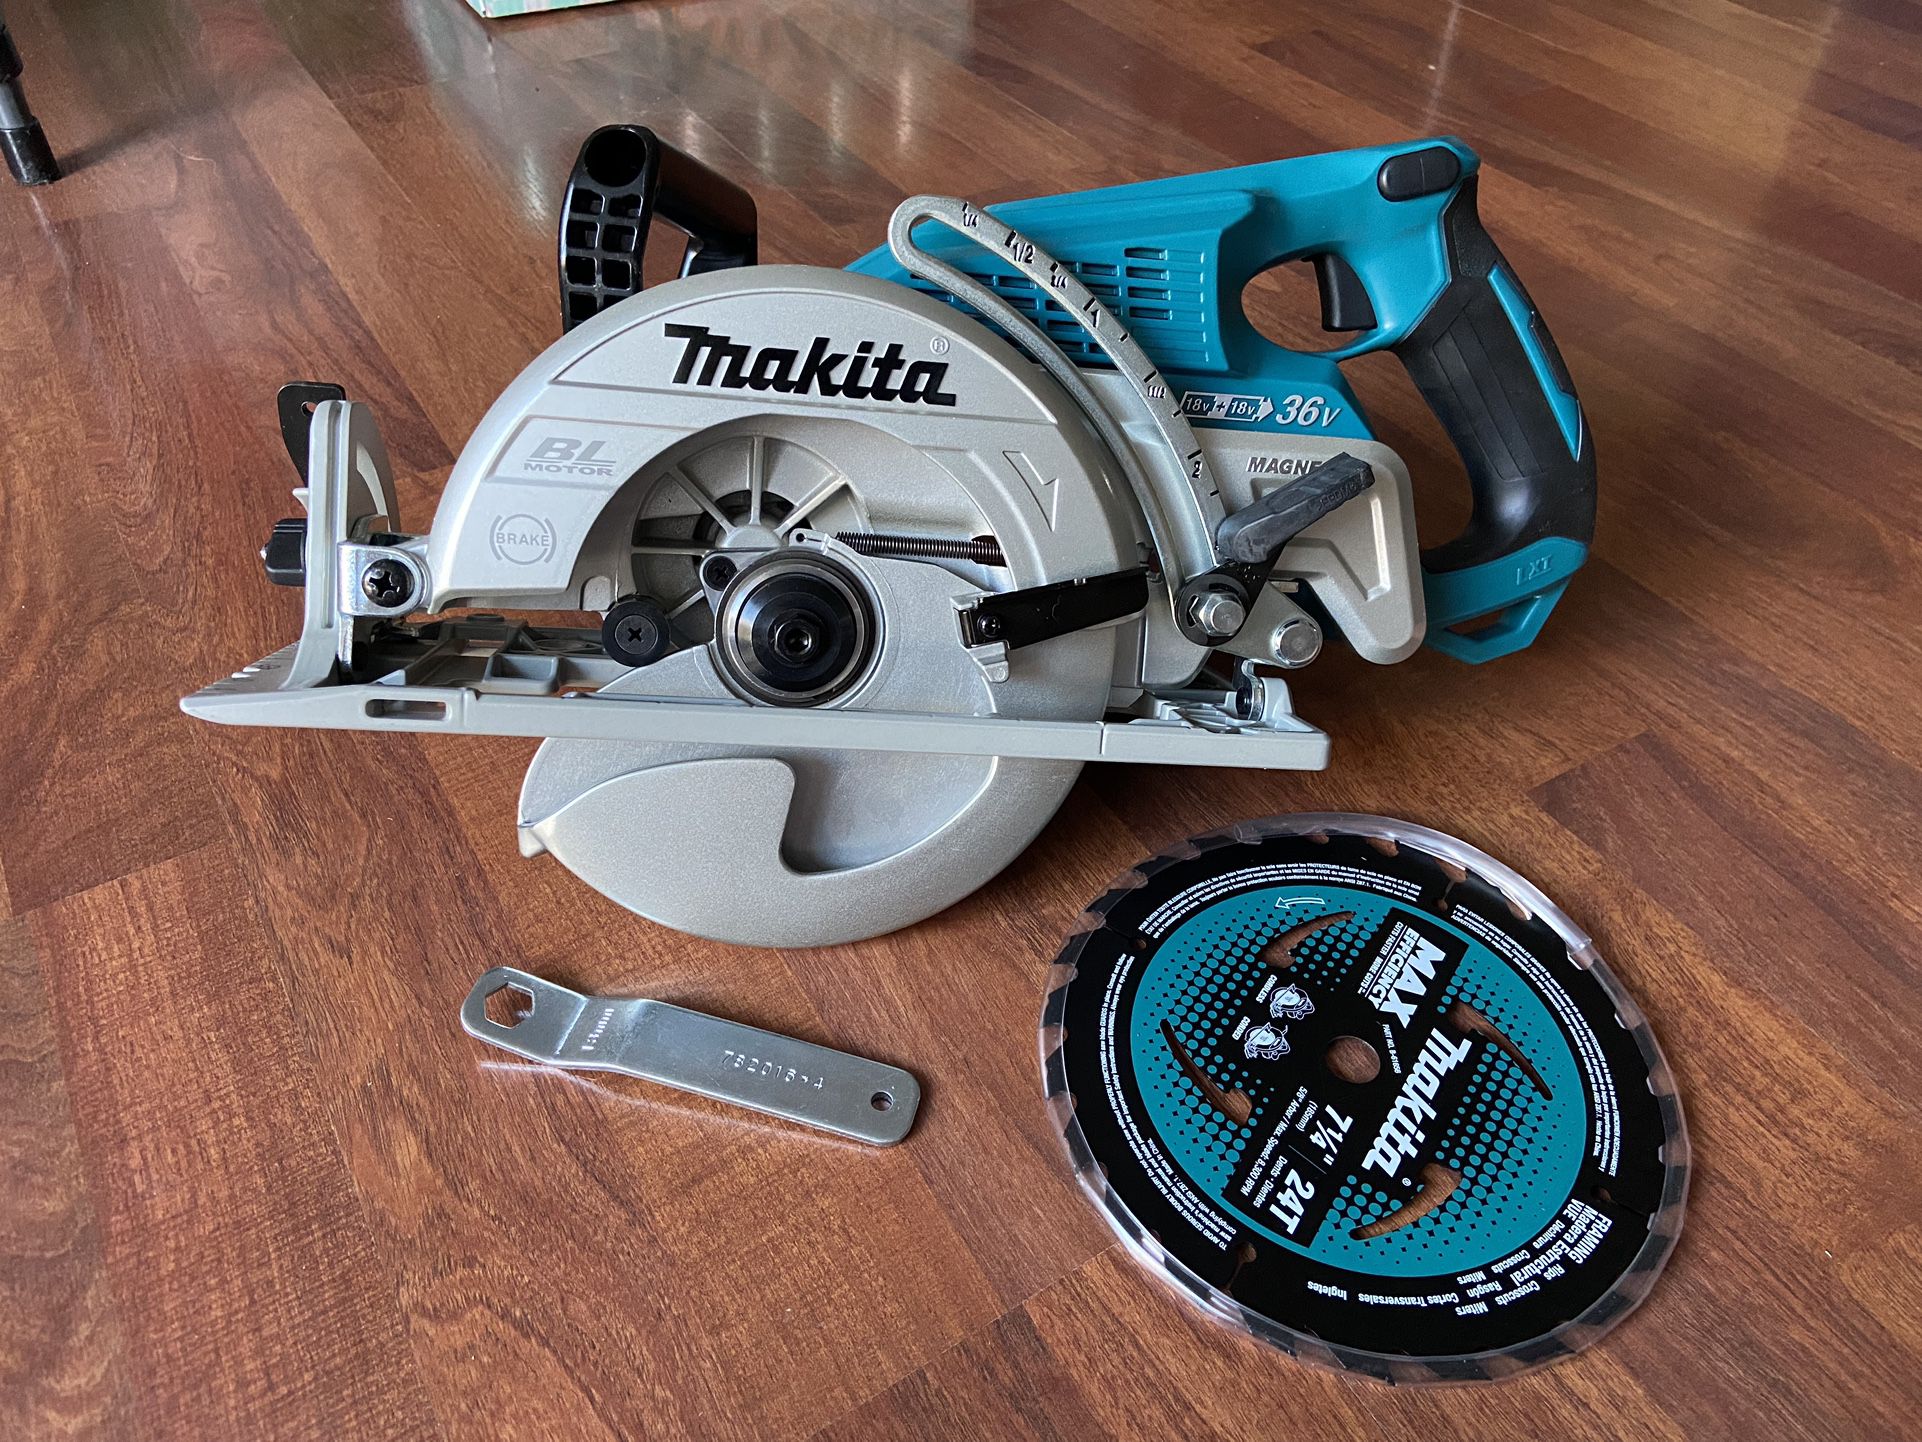 Makita 18V X2 LXT Lithium-Ion 36V Brushless Cordless Rear Handle 7-1/4" Circular Saw, Tool Only ( Brand new)